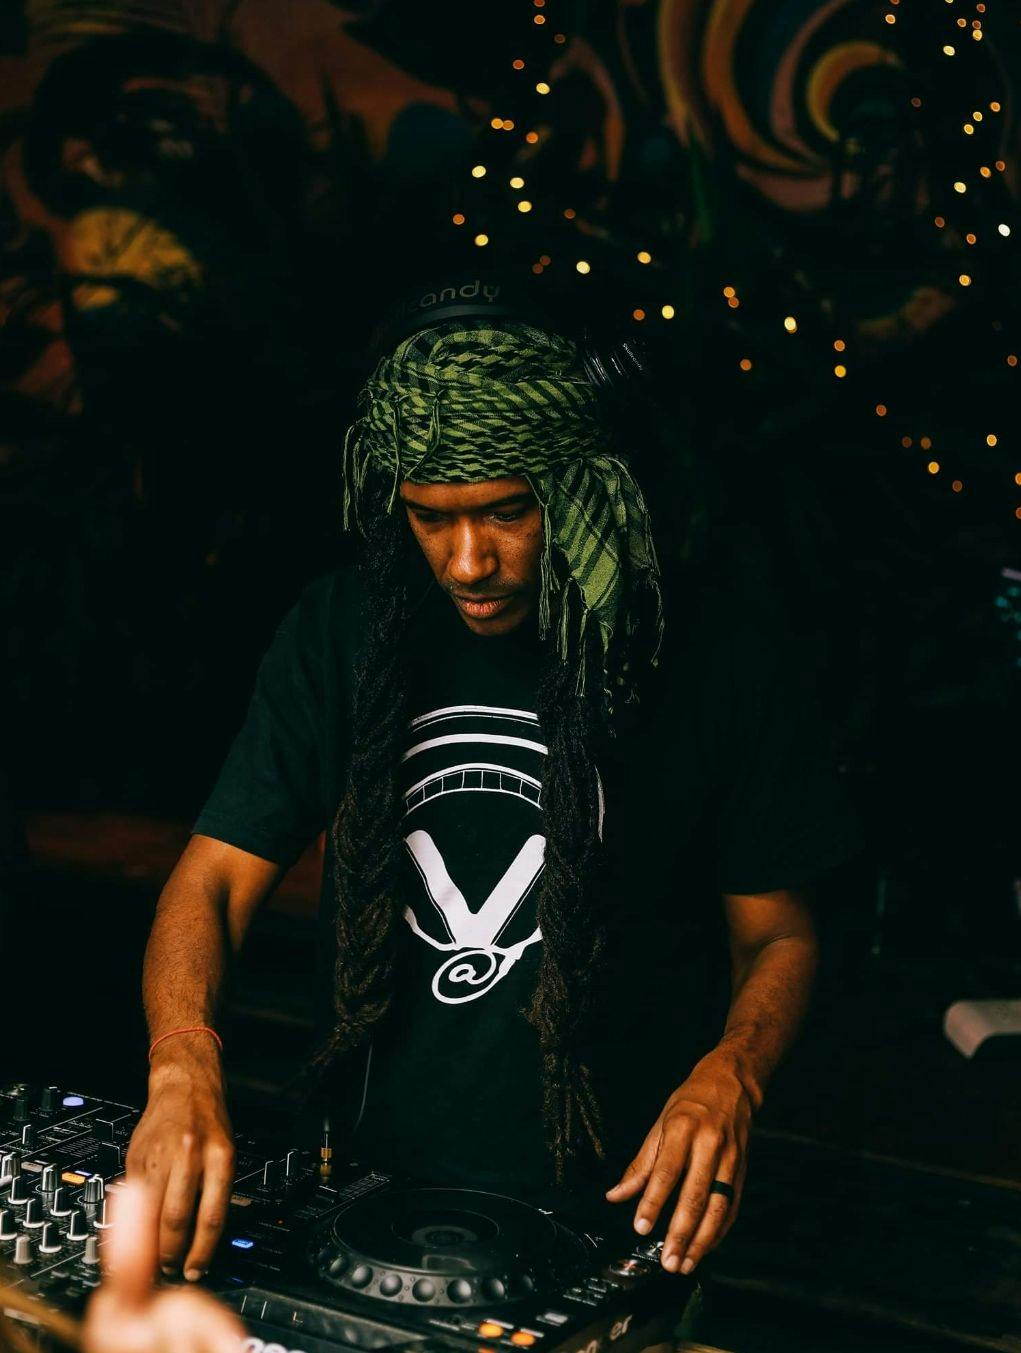 A man with a headscarf at the DJ deck